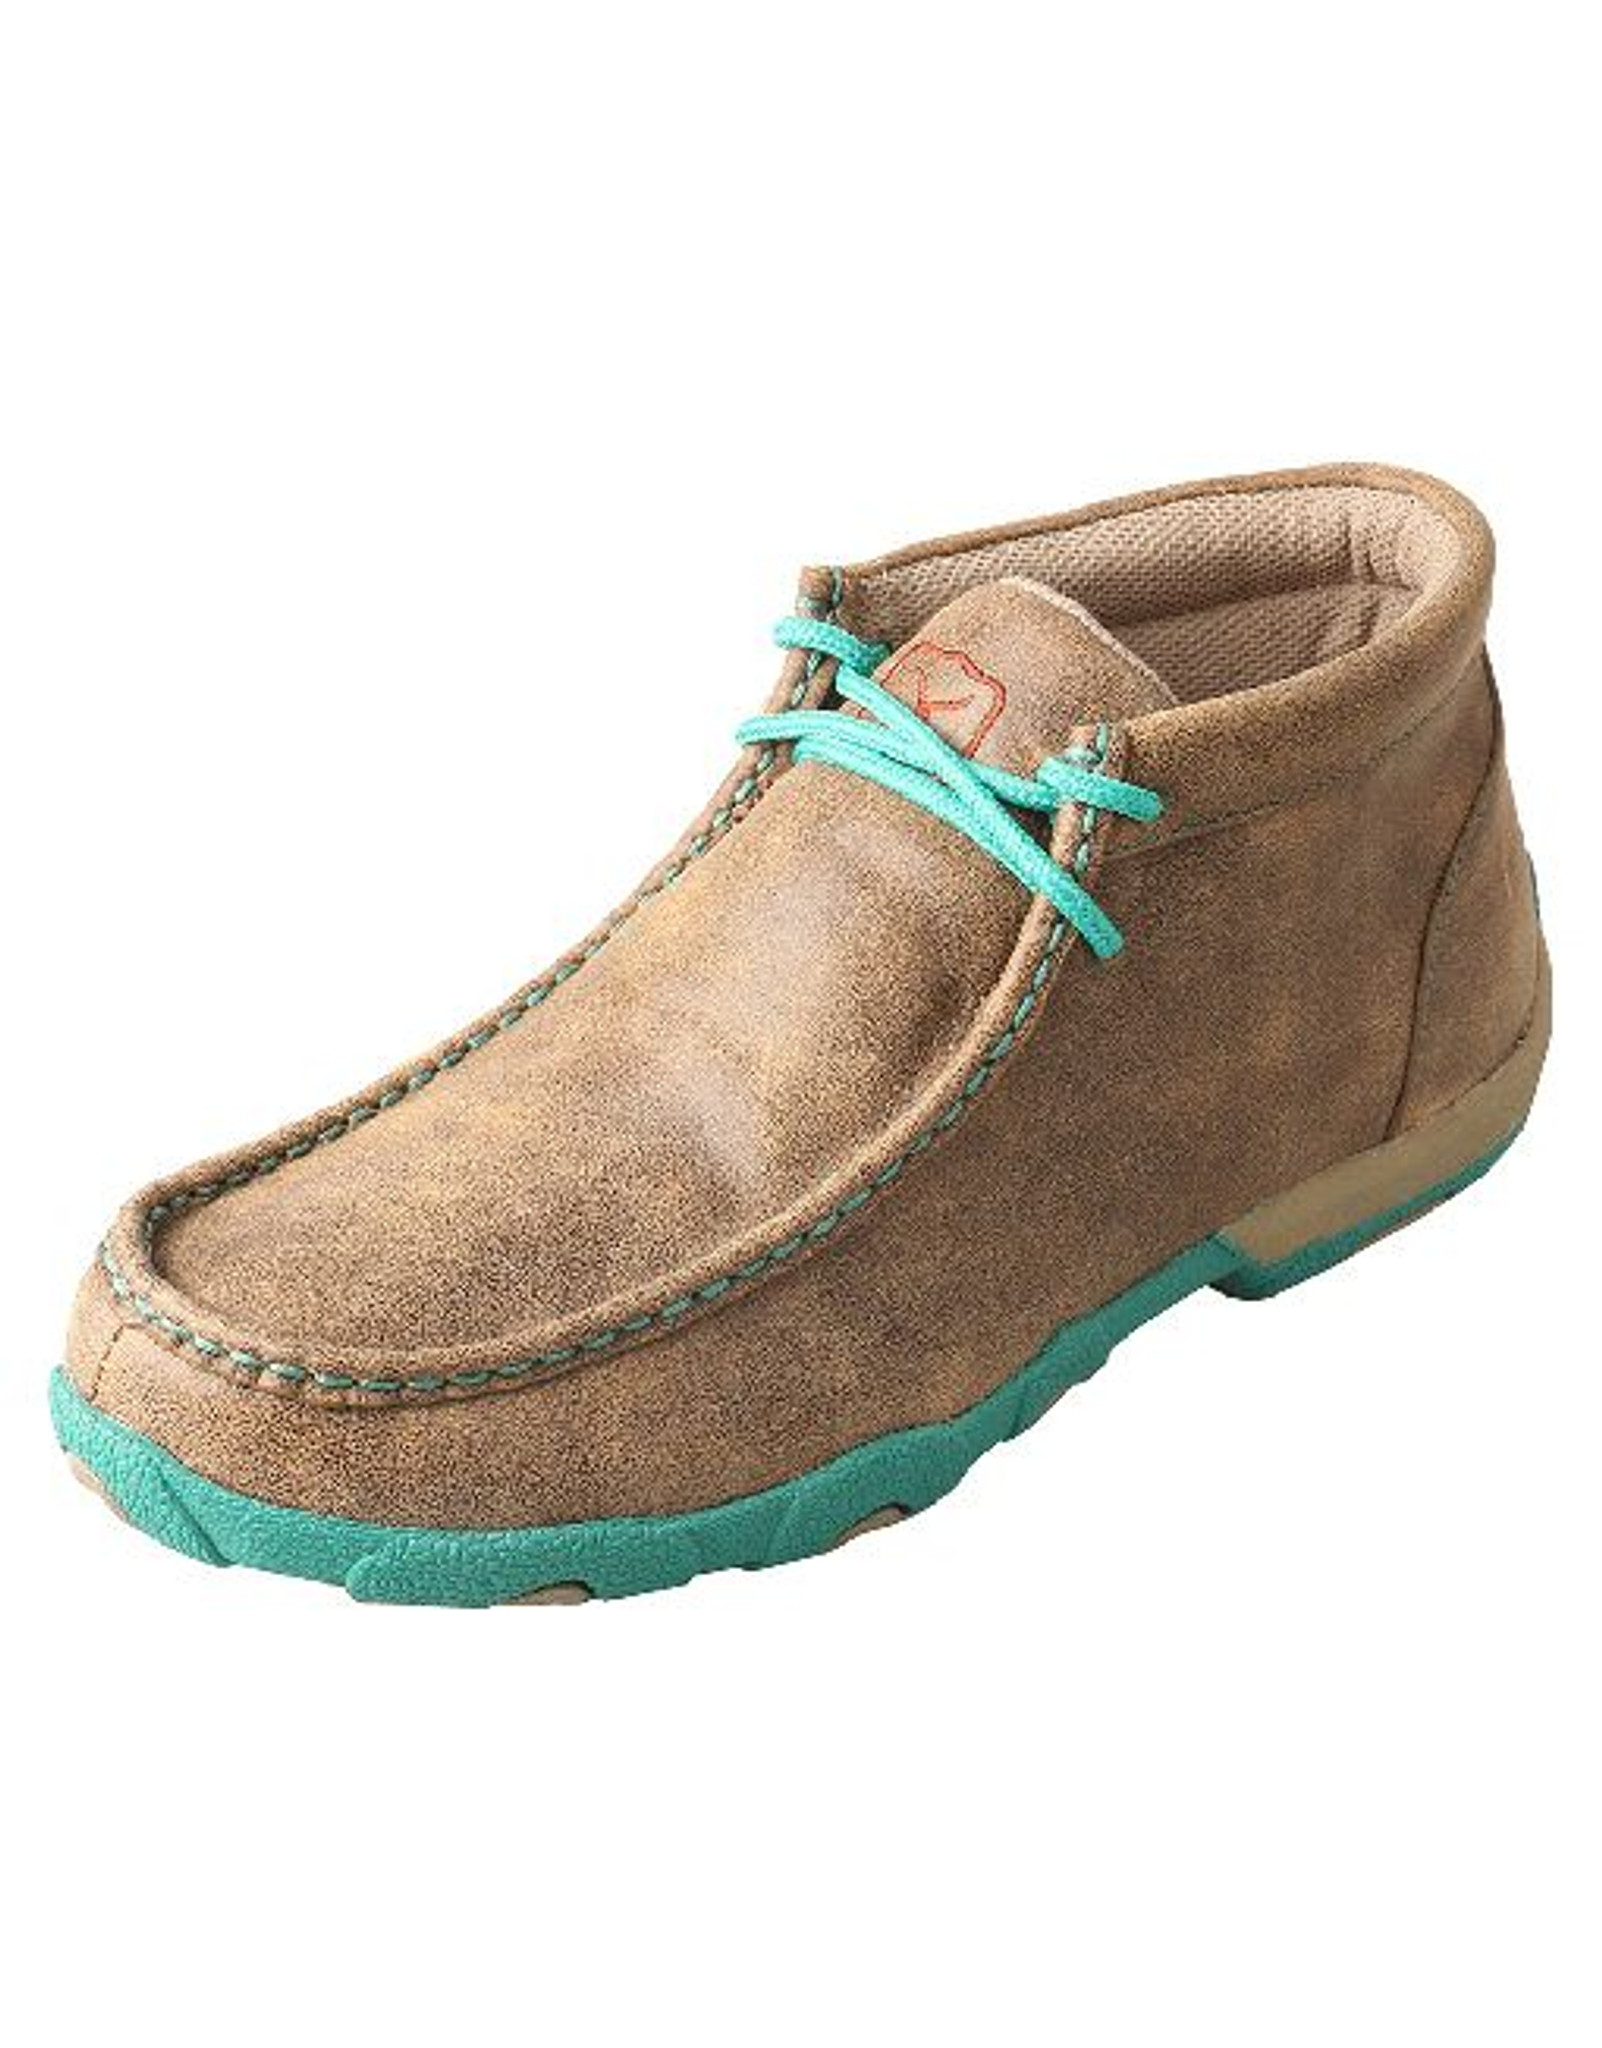 Twisted X Women's Driving Moc - Bomber/Turquoise